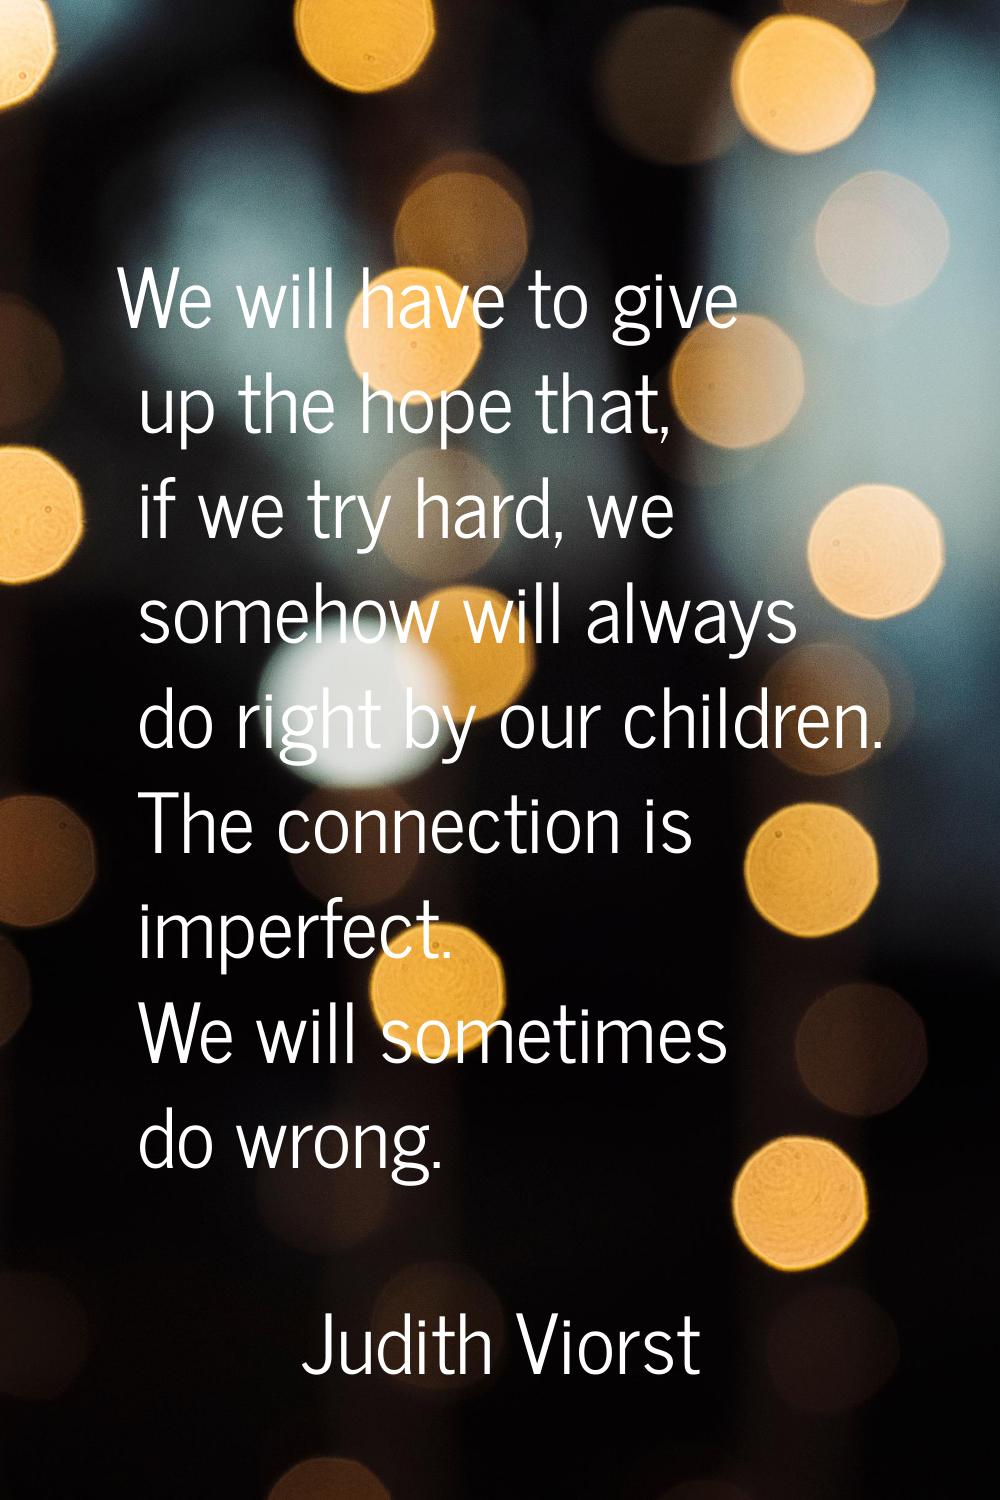 We will have to give up the hope that, if we try hard, we somehow will always do right by our child